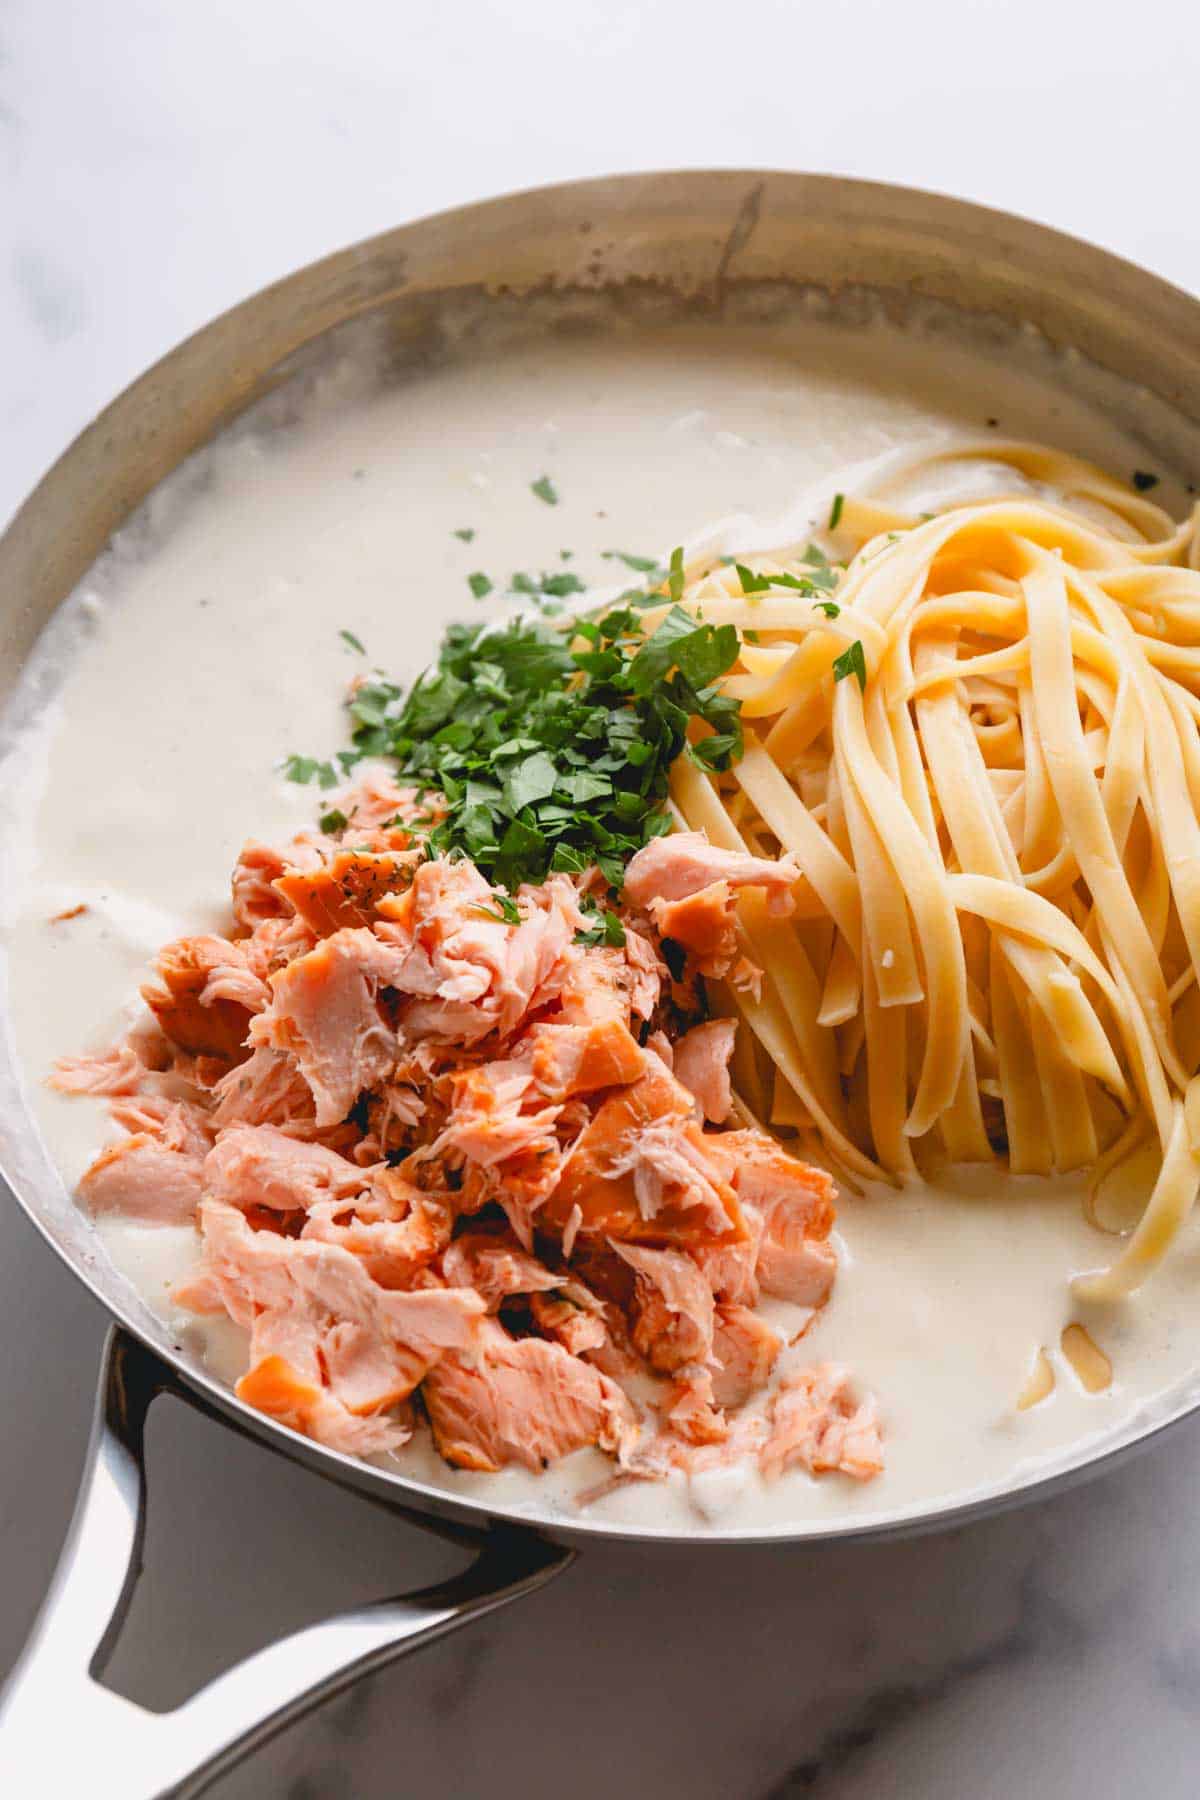 Smoked salmon, cooked fettuccine noodles, and parsley being added to alfredo sauce in a skillet.